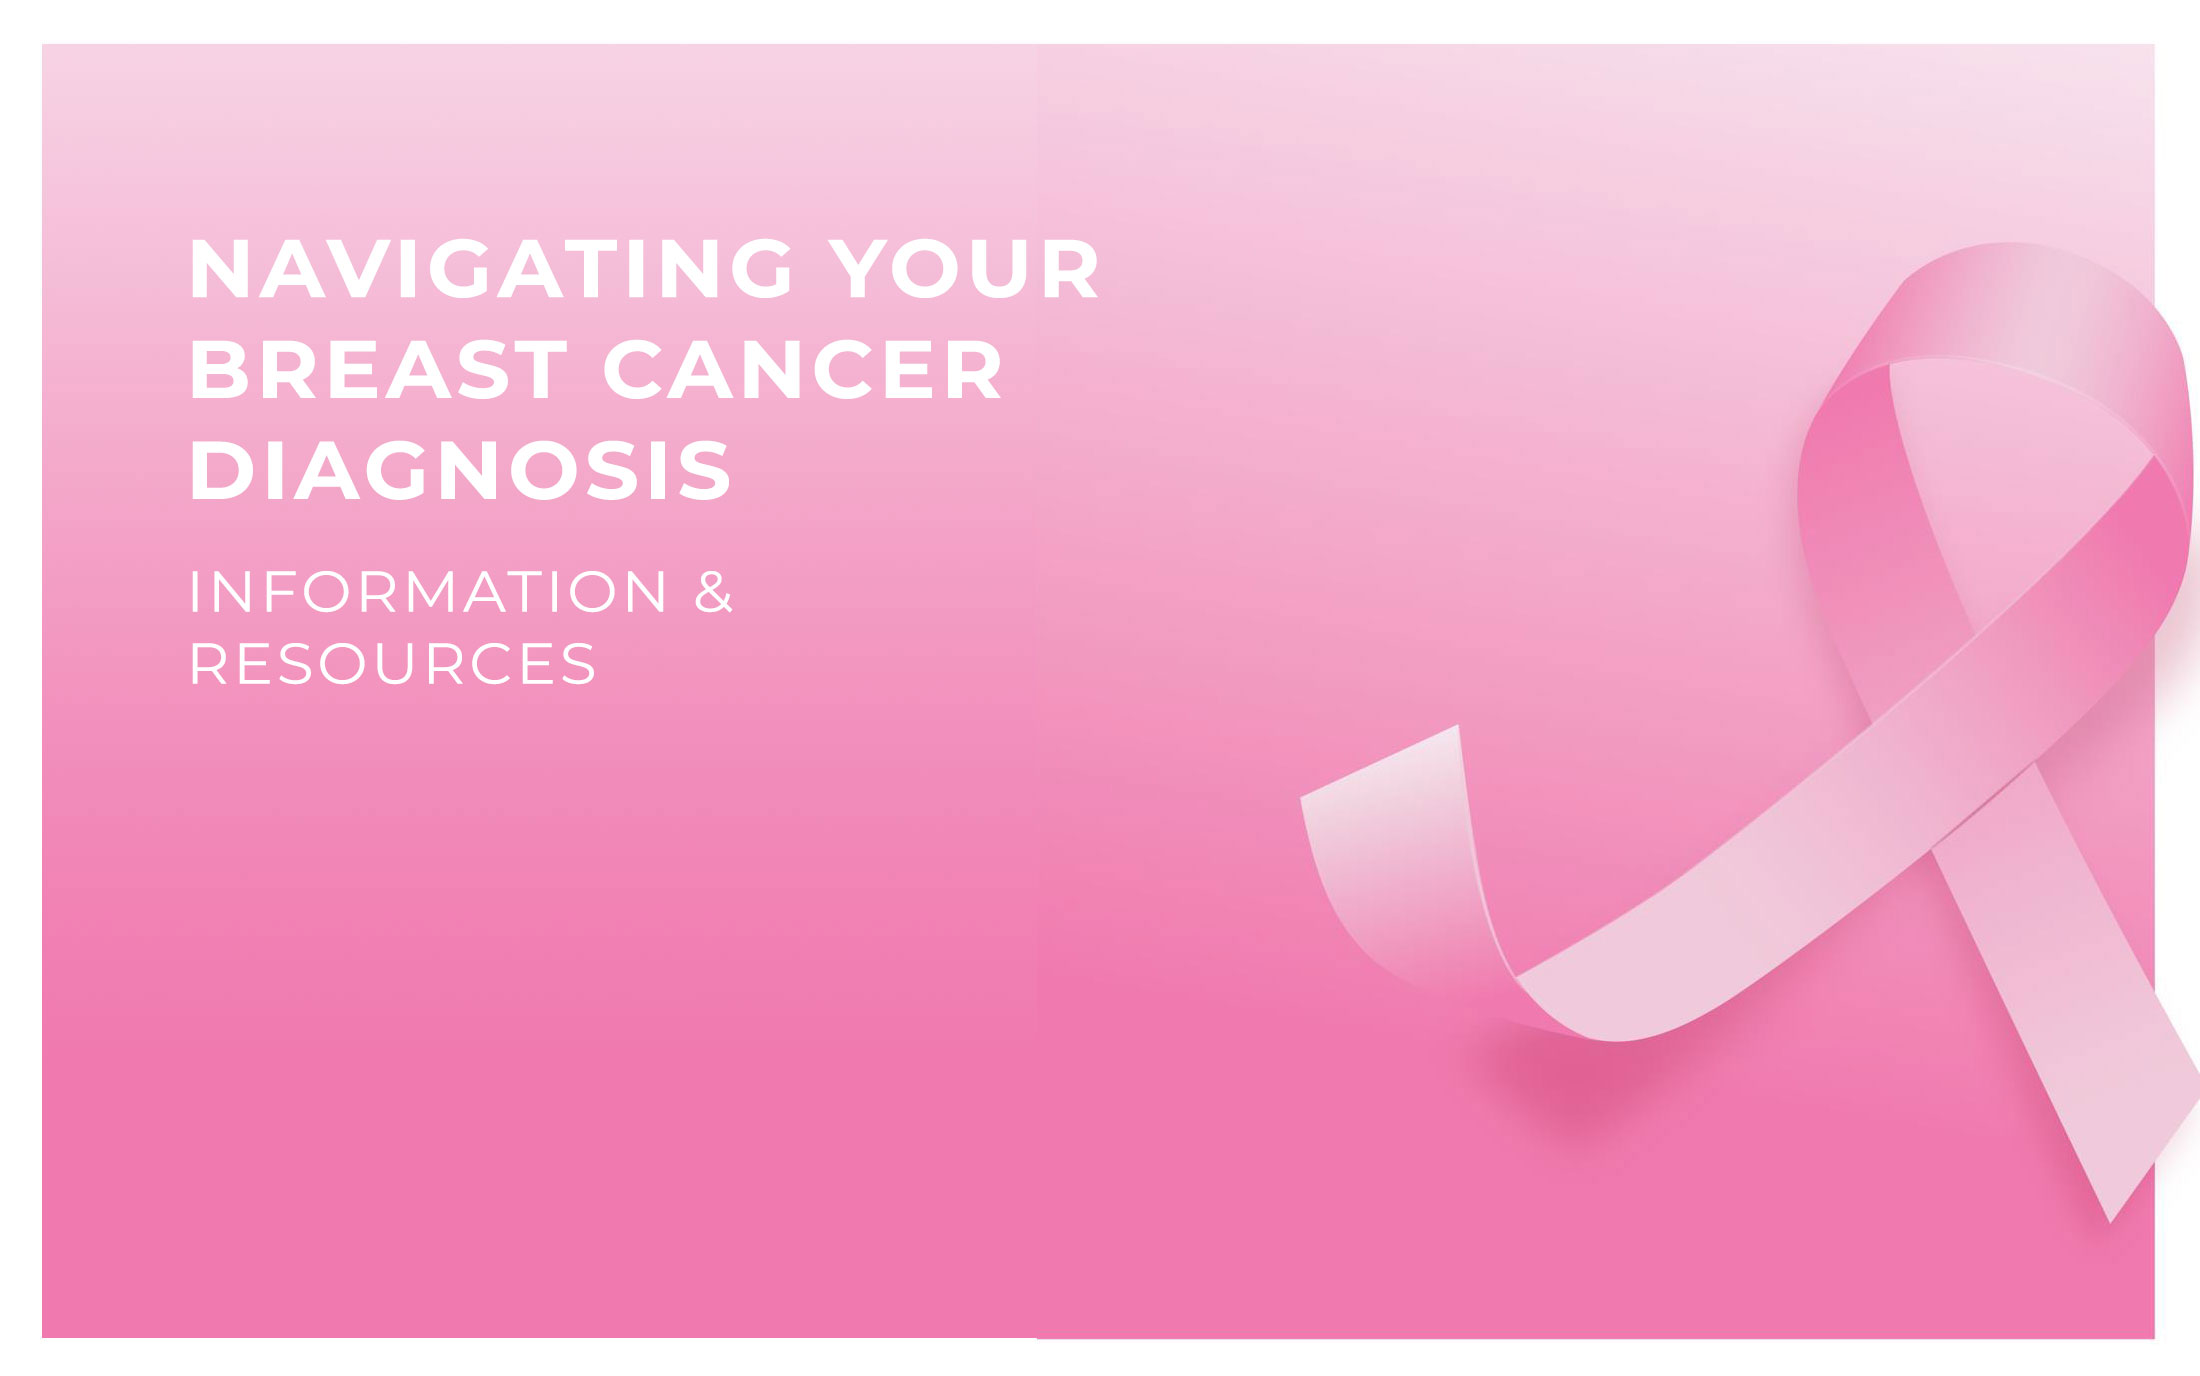 Navigating Breast Cancer- Terminology - The IBC Network Foundation